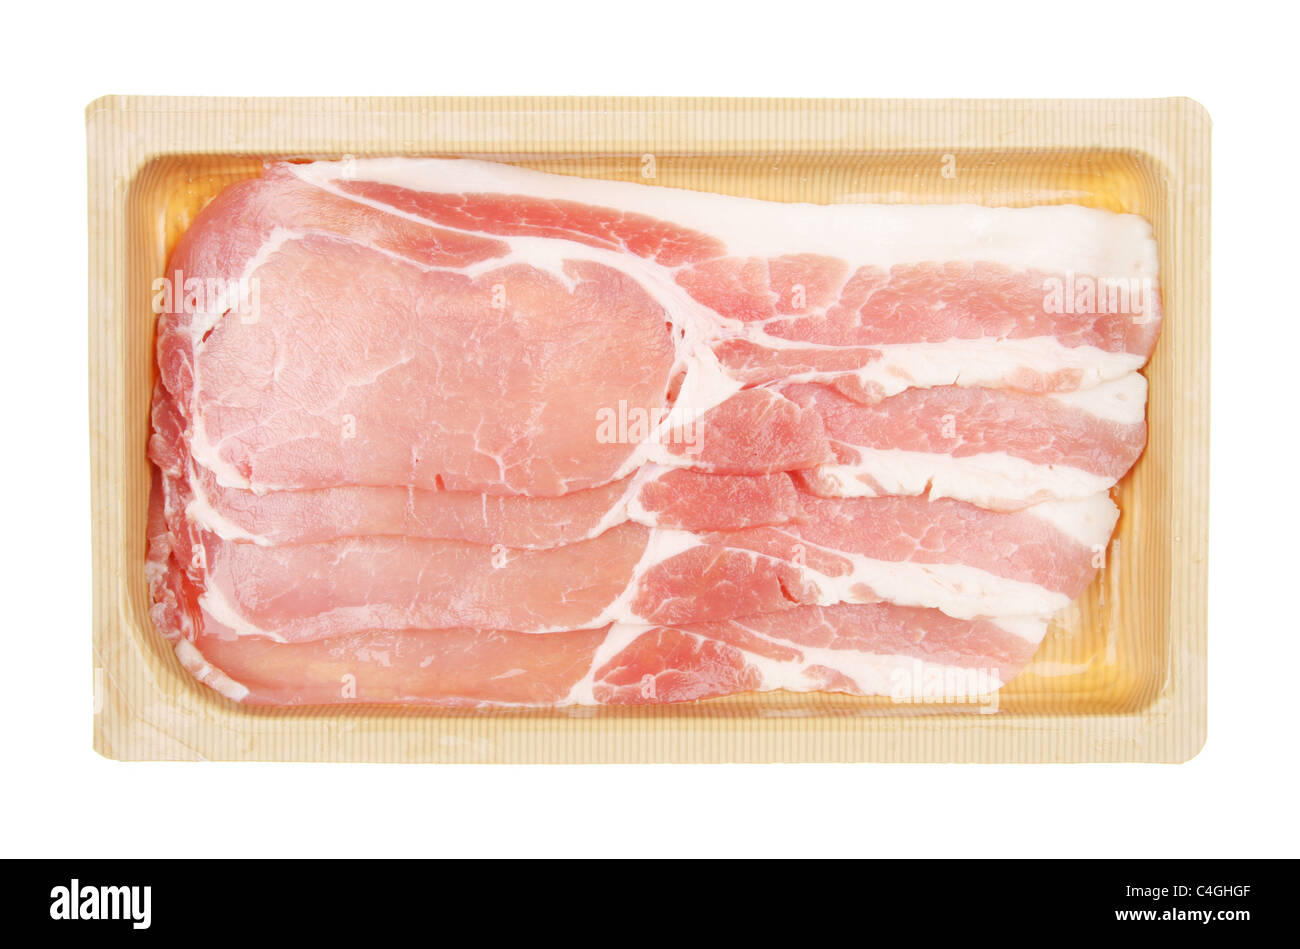 Bacon rashers in carton isolated against white Stock Photo